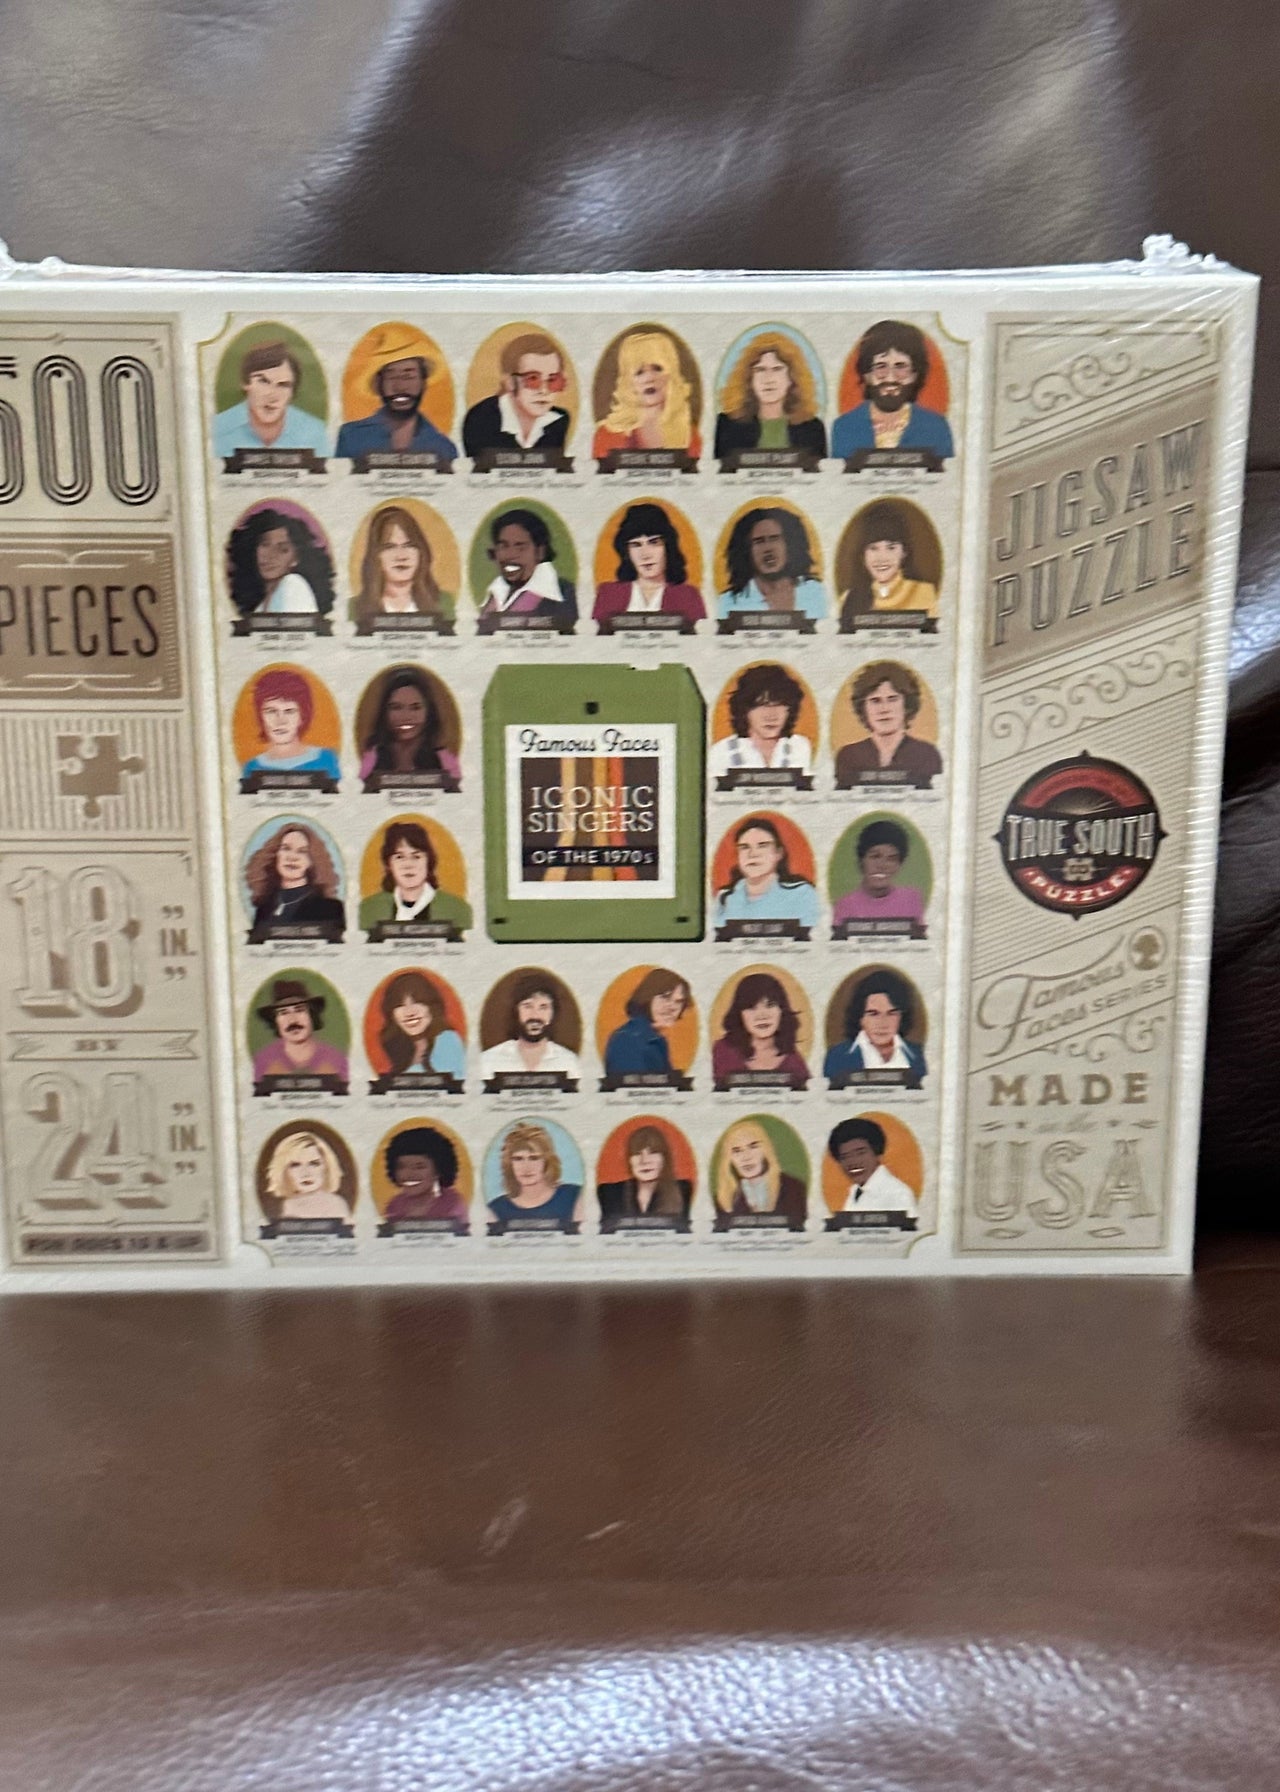 Iconic Singers of the 1970s Puzzle True South Puzzle Co